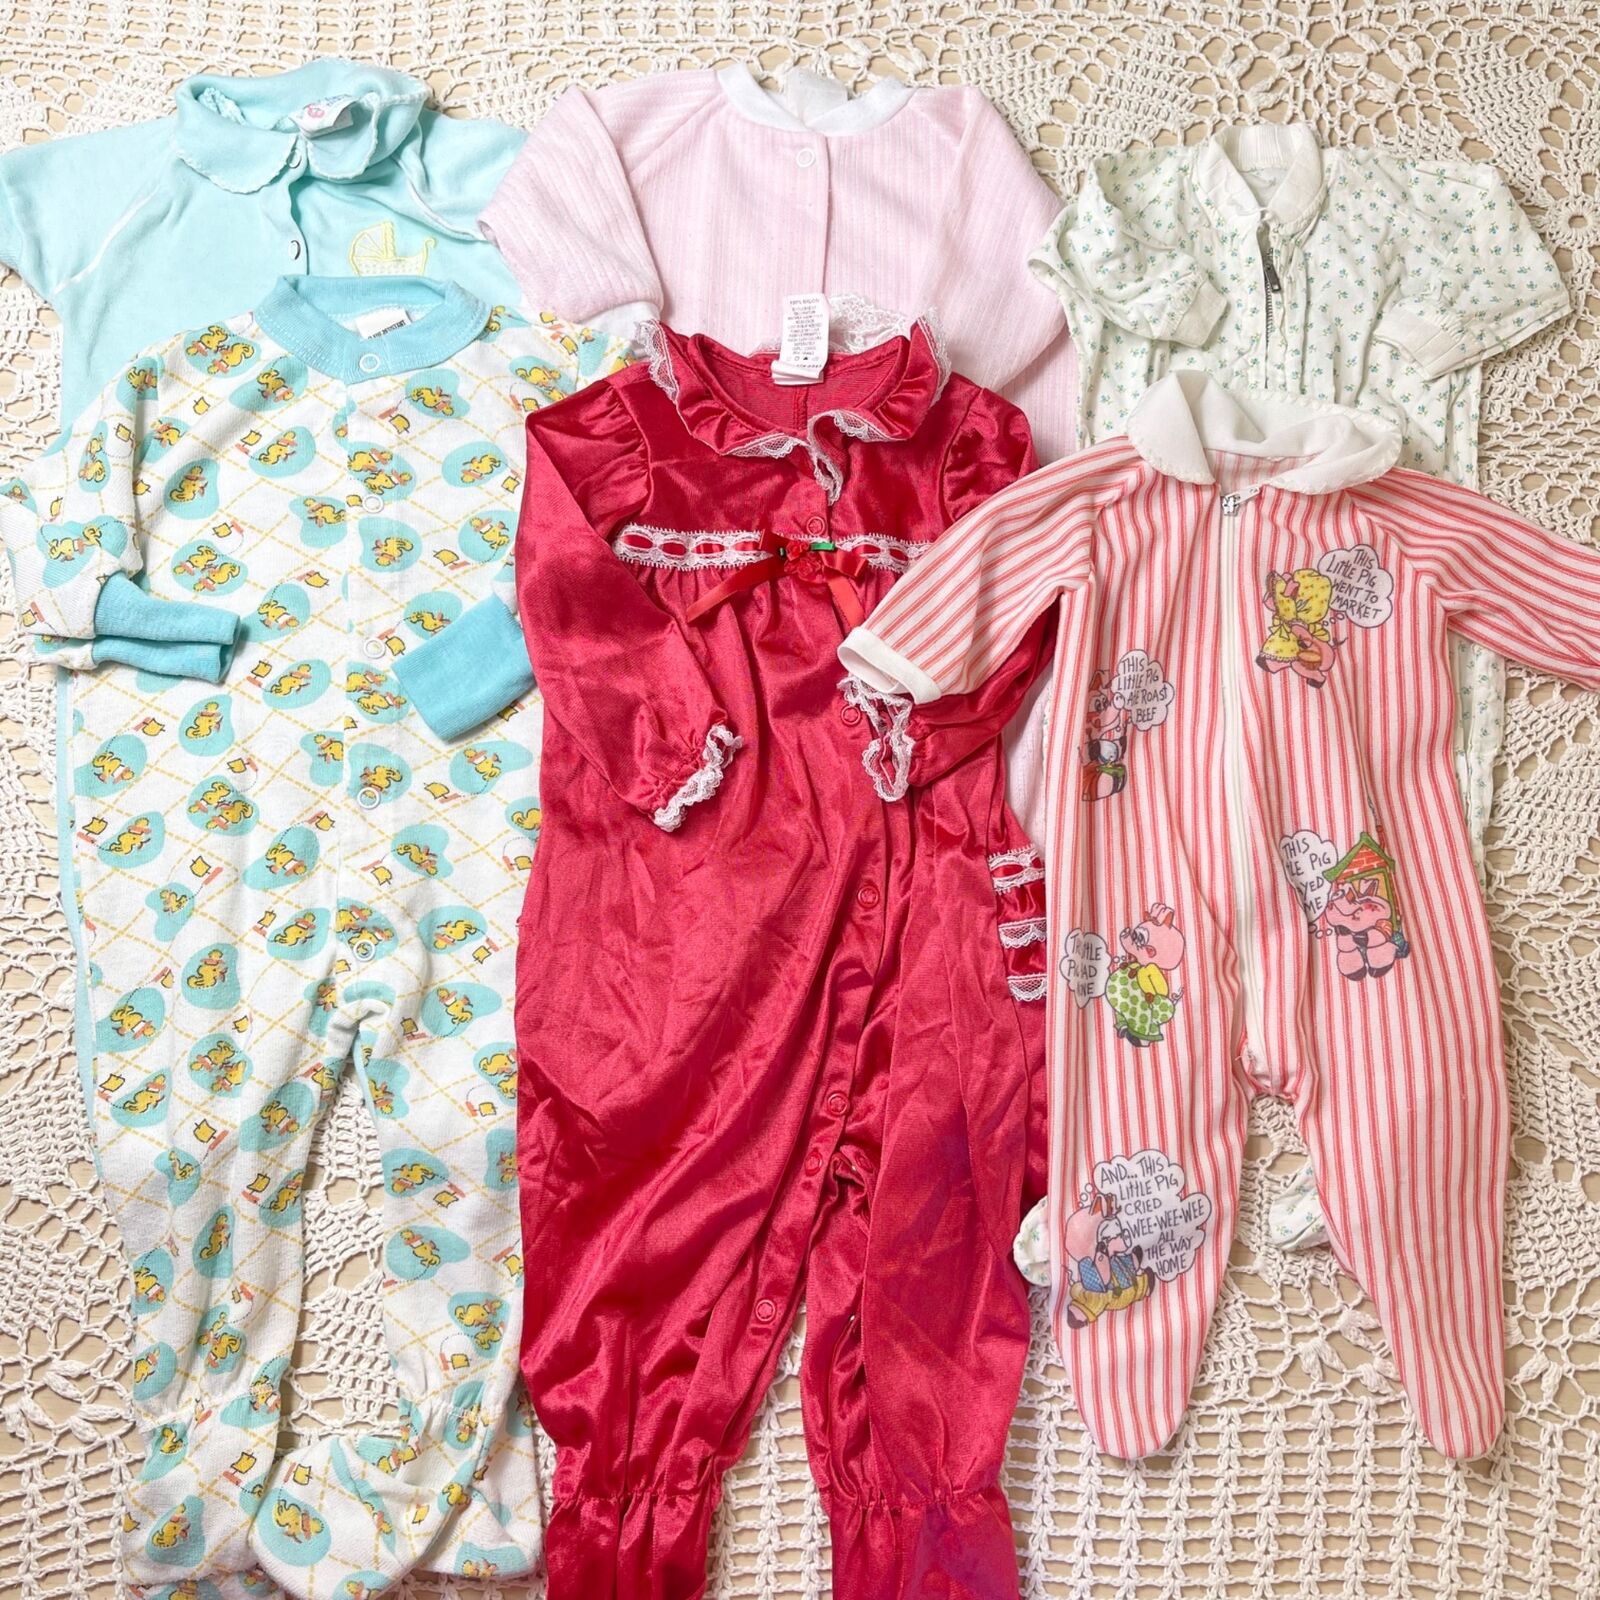 Lot Of 6 Vintage Infant Sleepers 0-12 Months